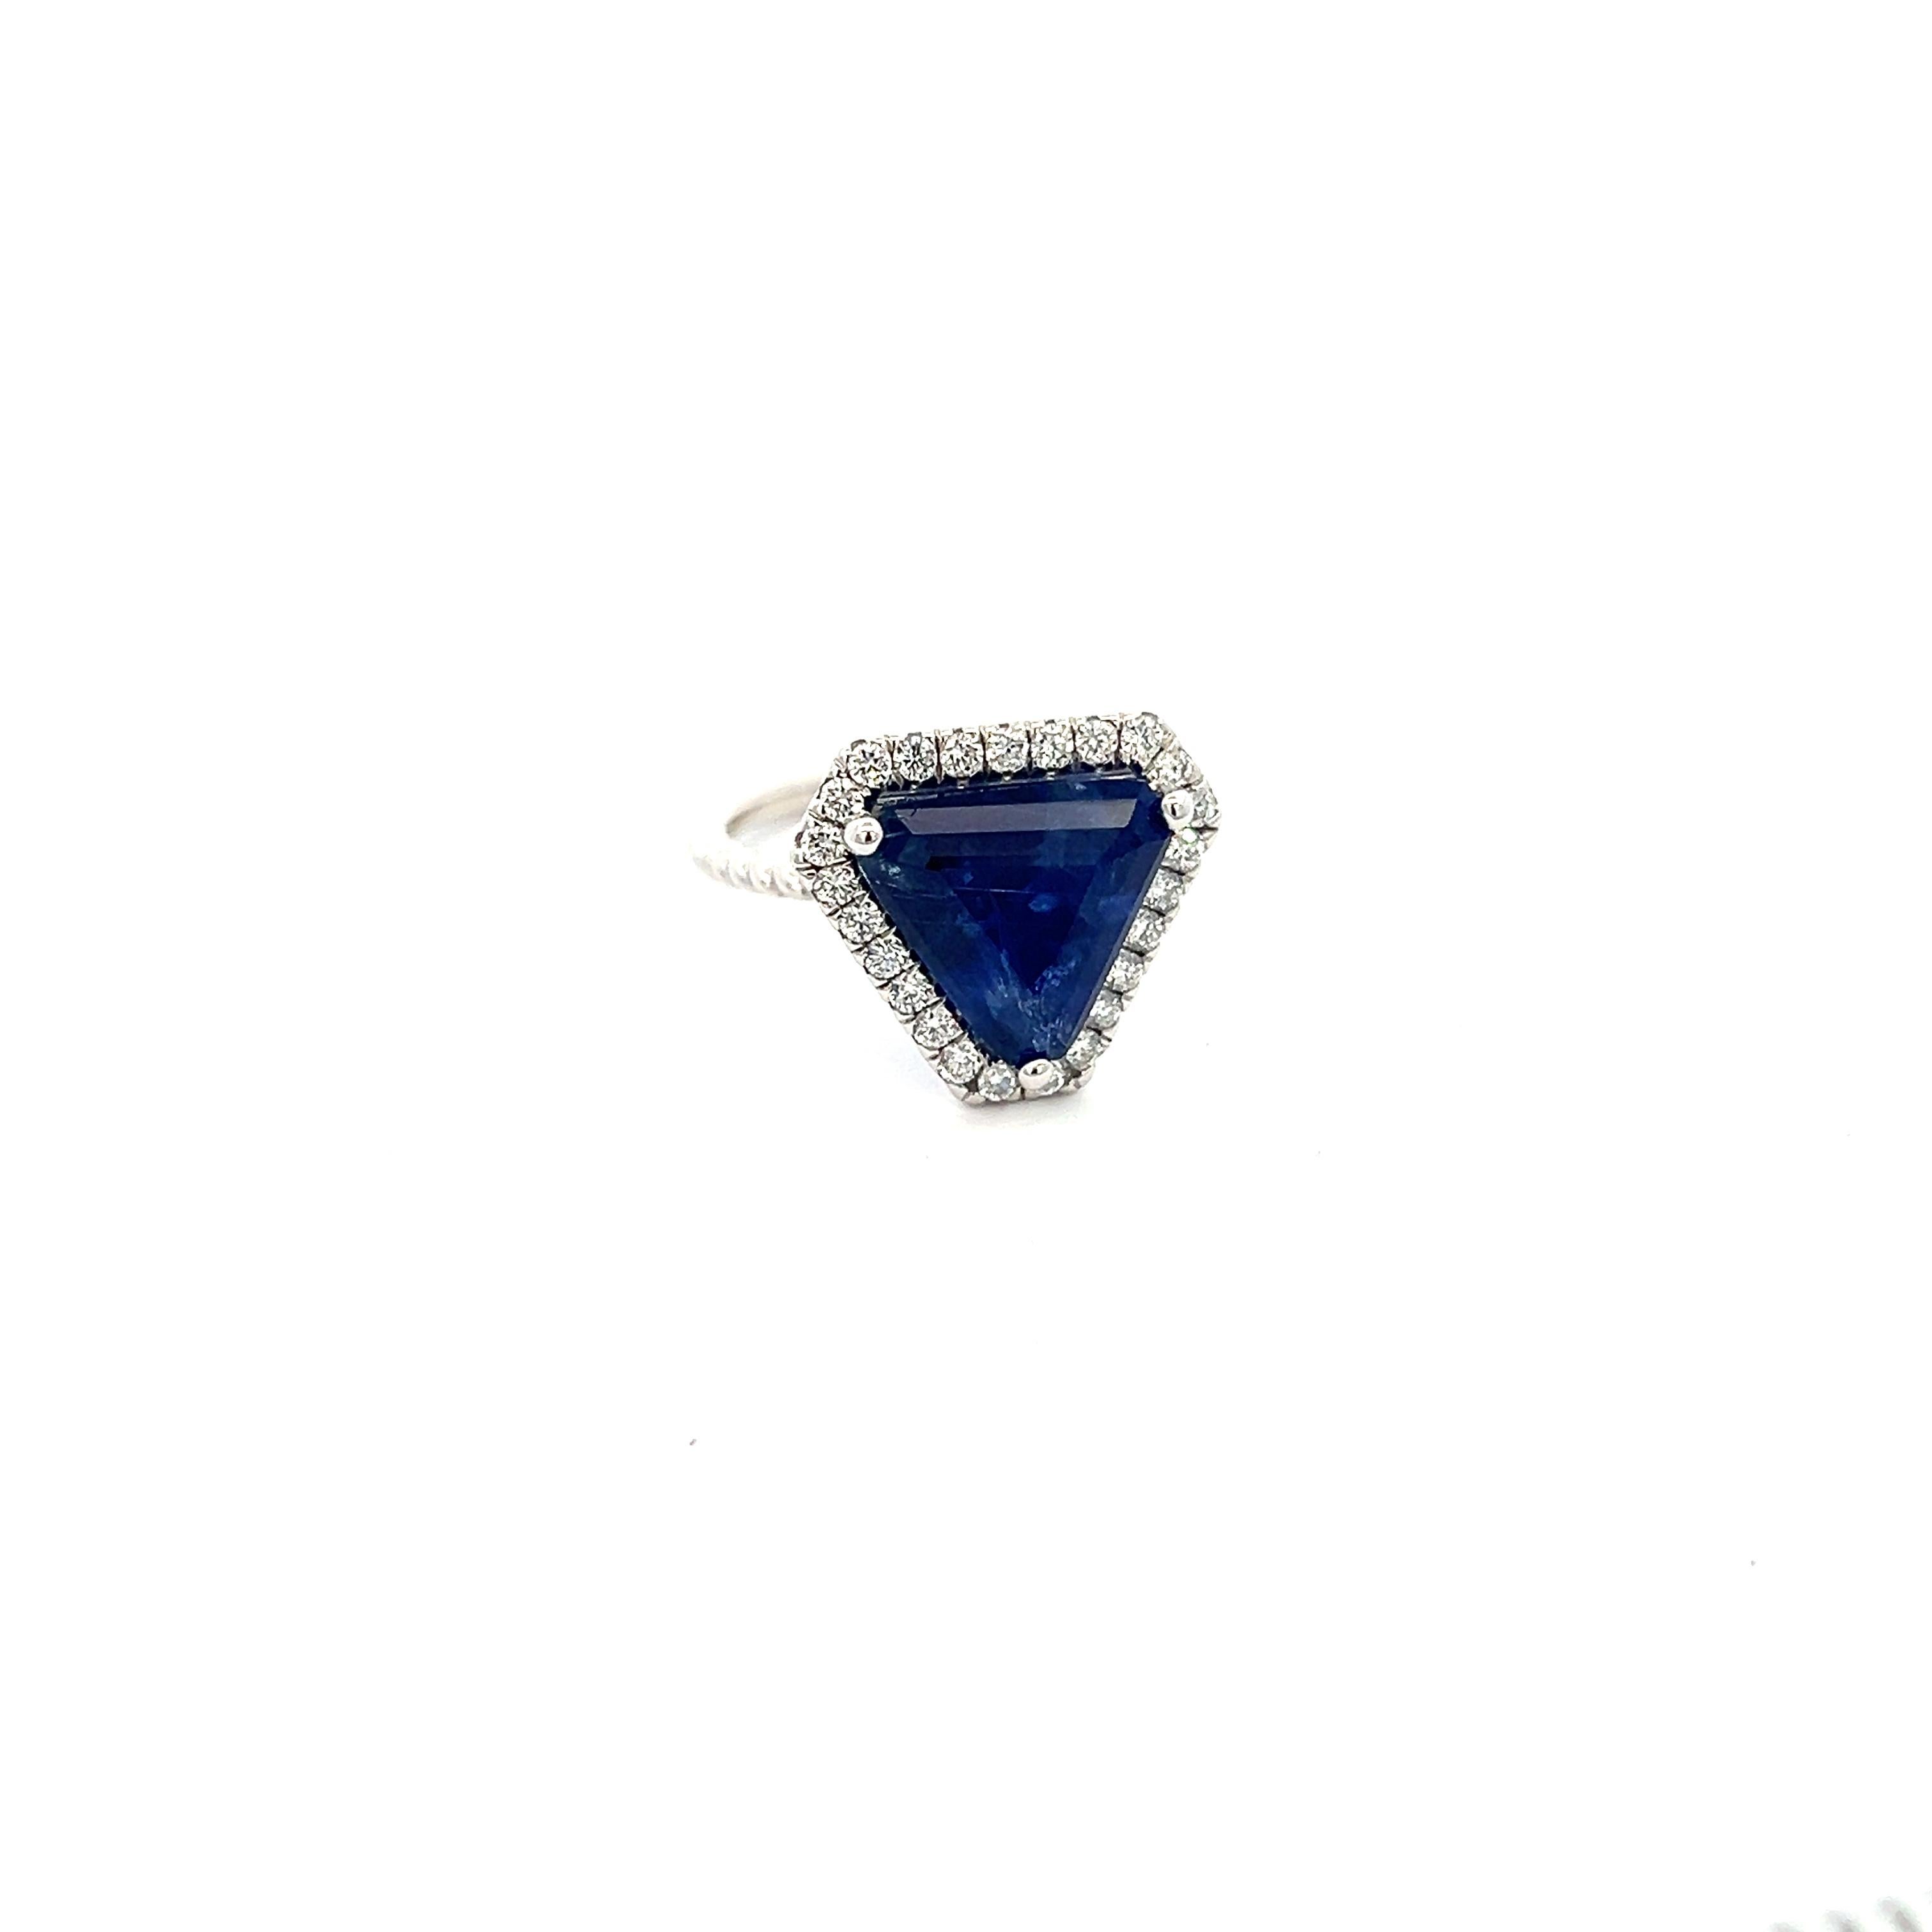 Natural Sapphire Diamond Ring 6.5 14k W Gold 5.84 TCW Certified For Sale 3